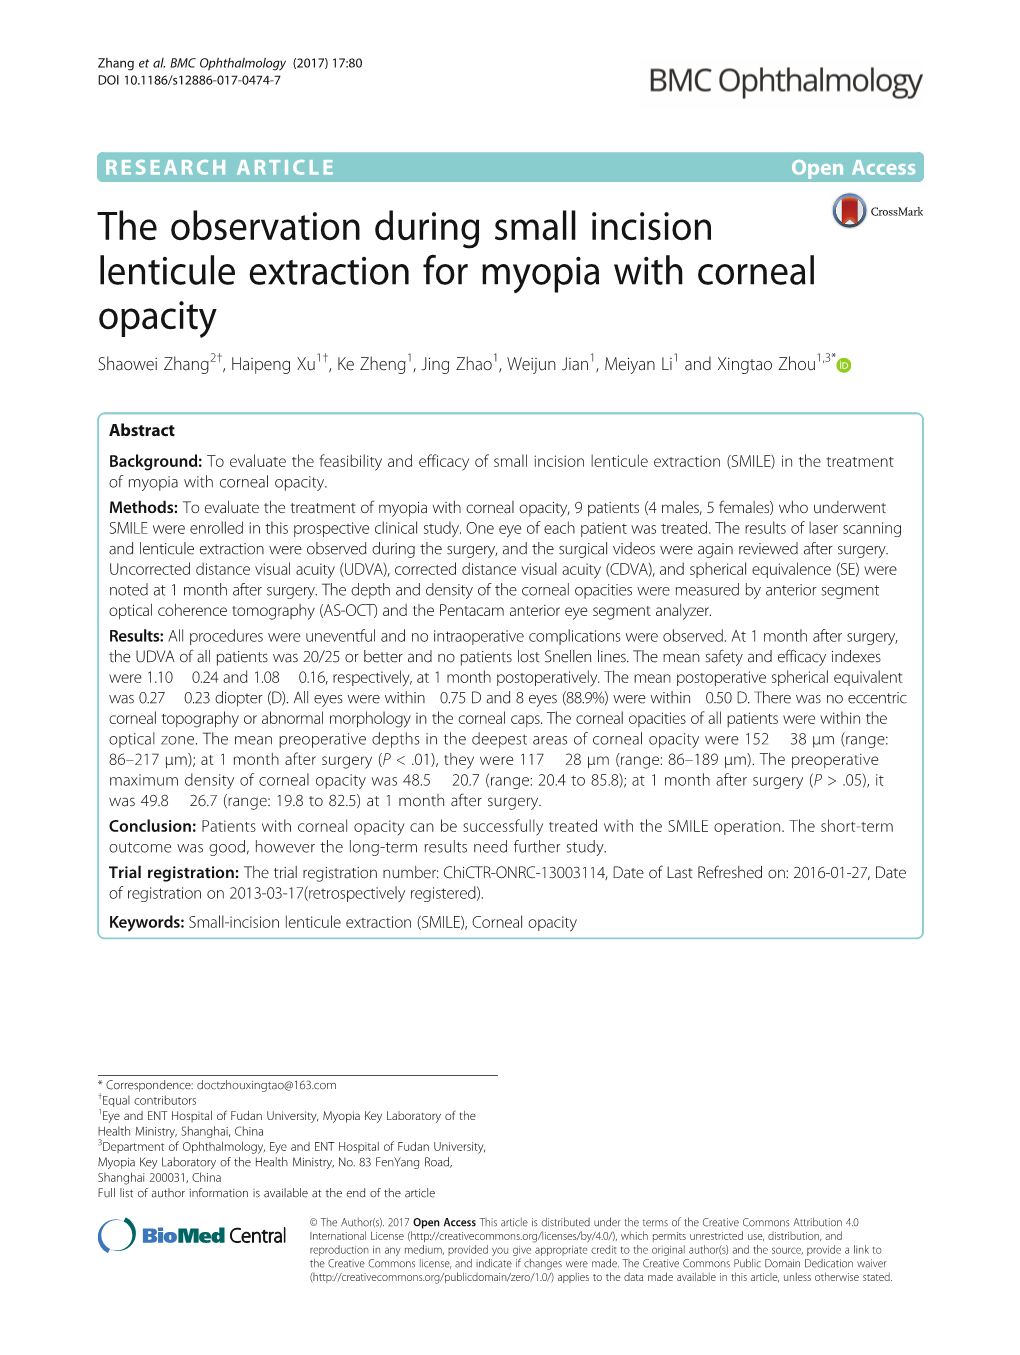 The Observation During Small Incision Lenticule Extraction for Myopia With